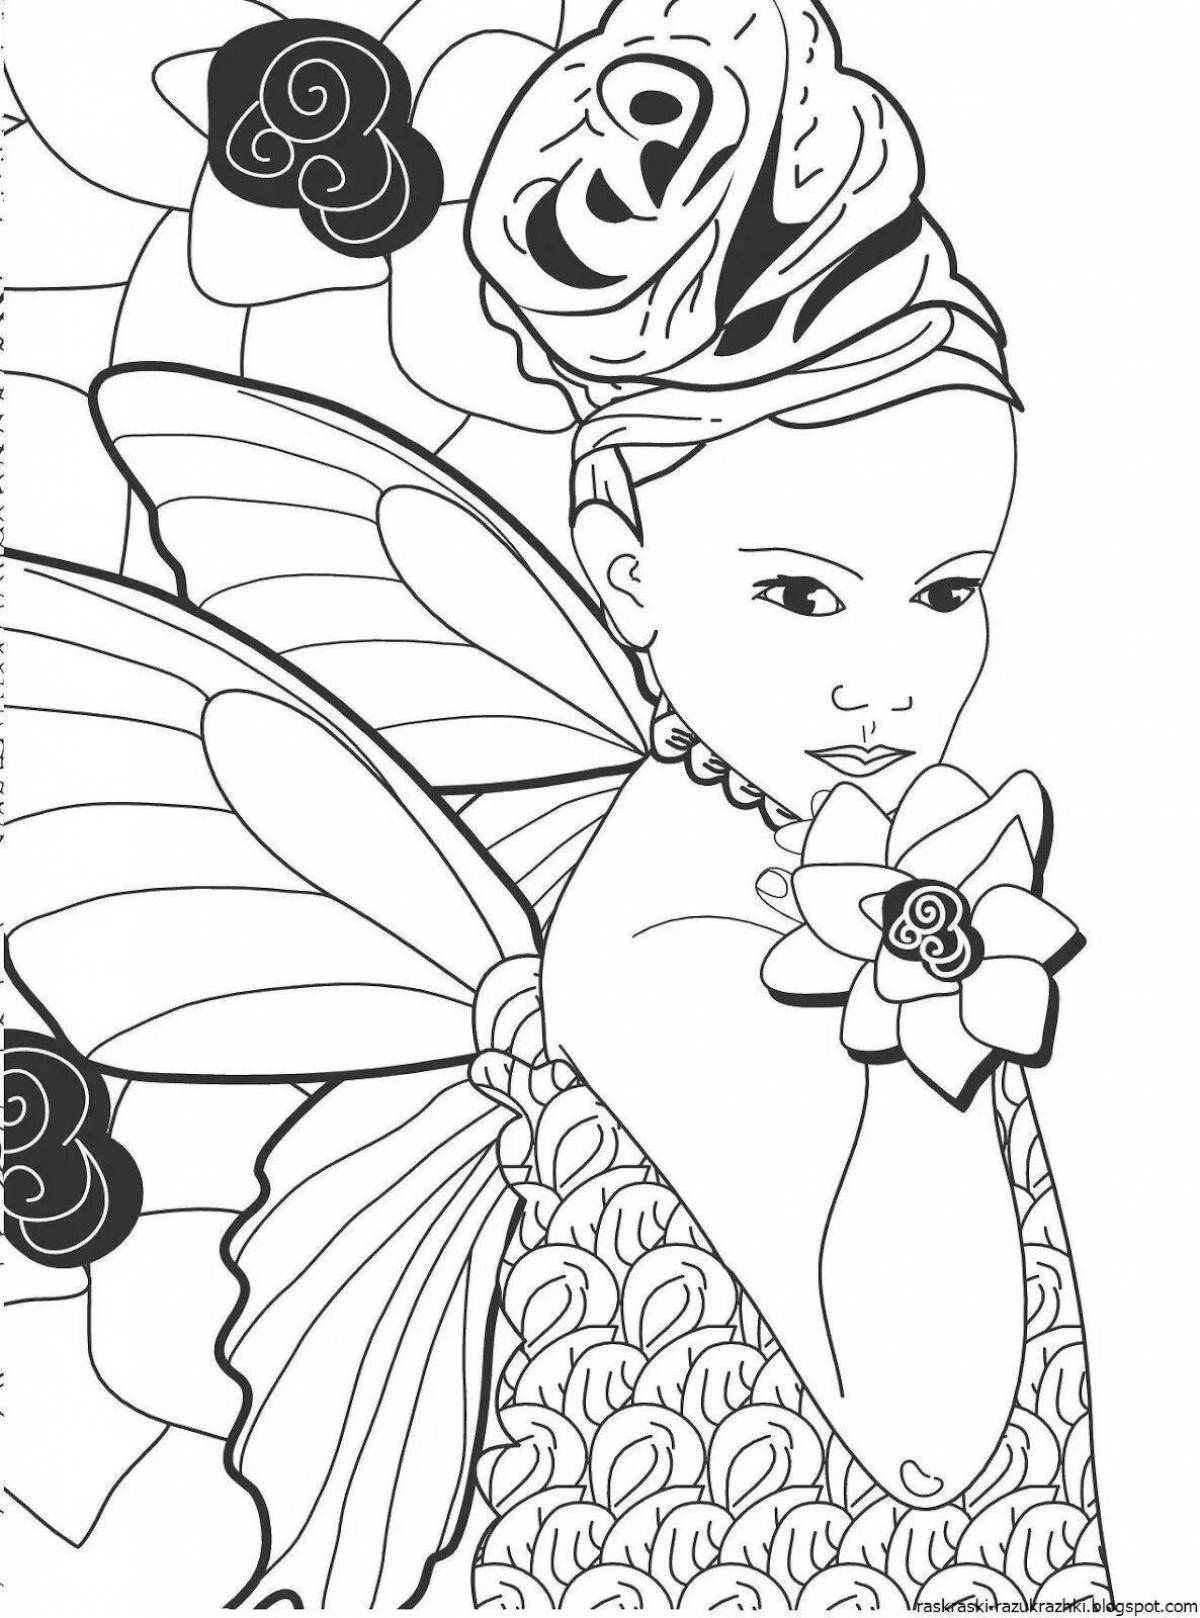 Exquisite coloring book for girls is the best in the world